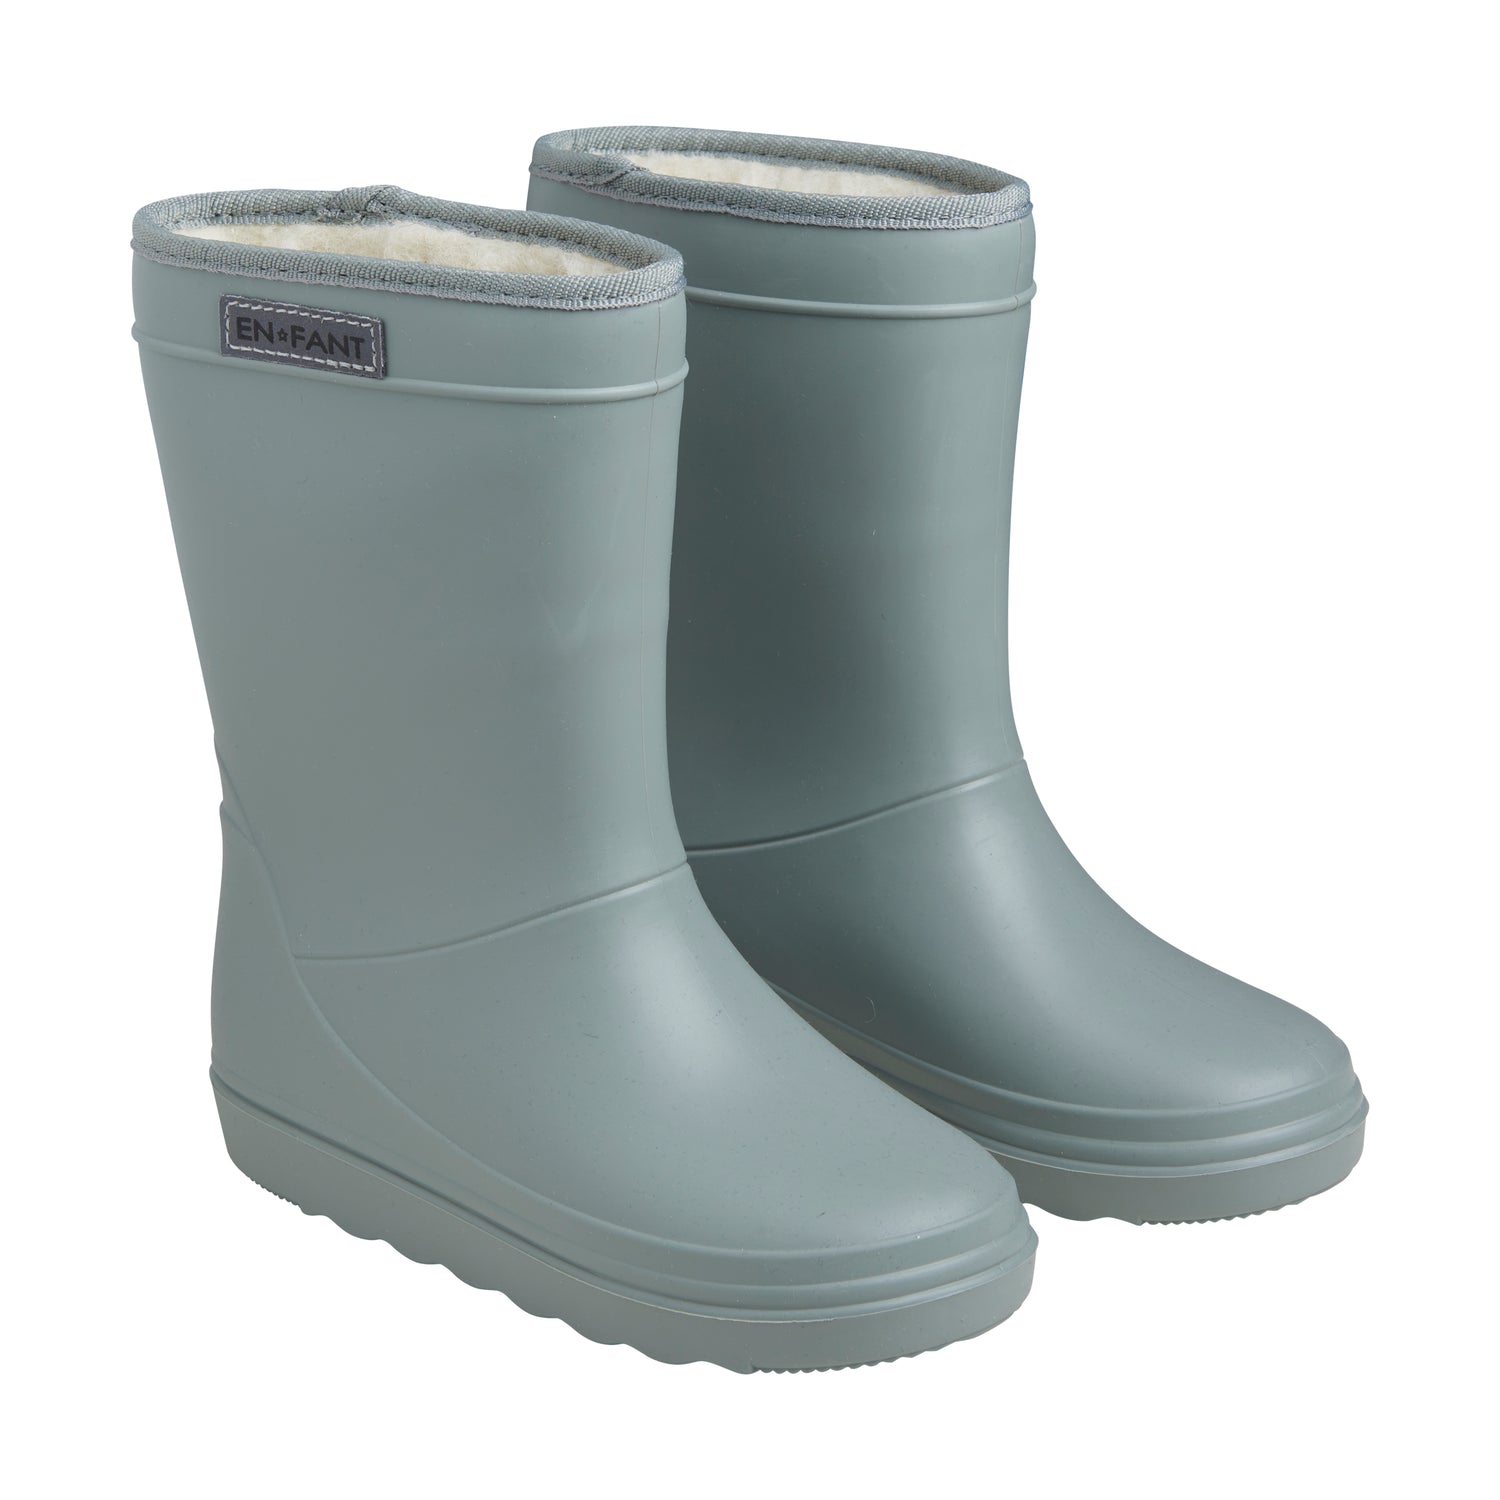 Thermostiefel